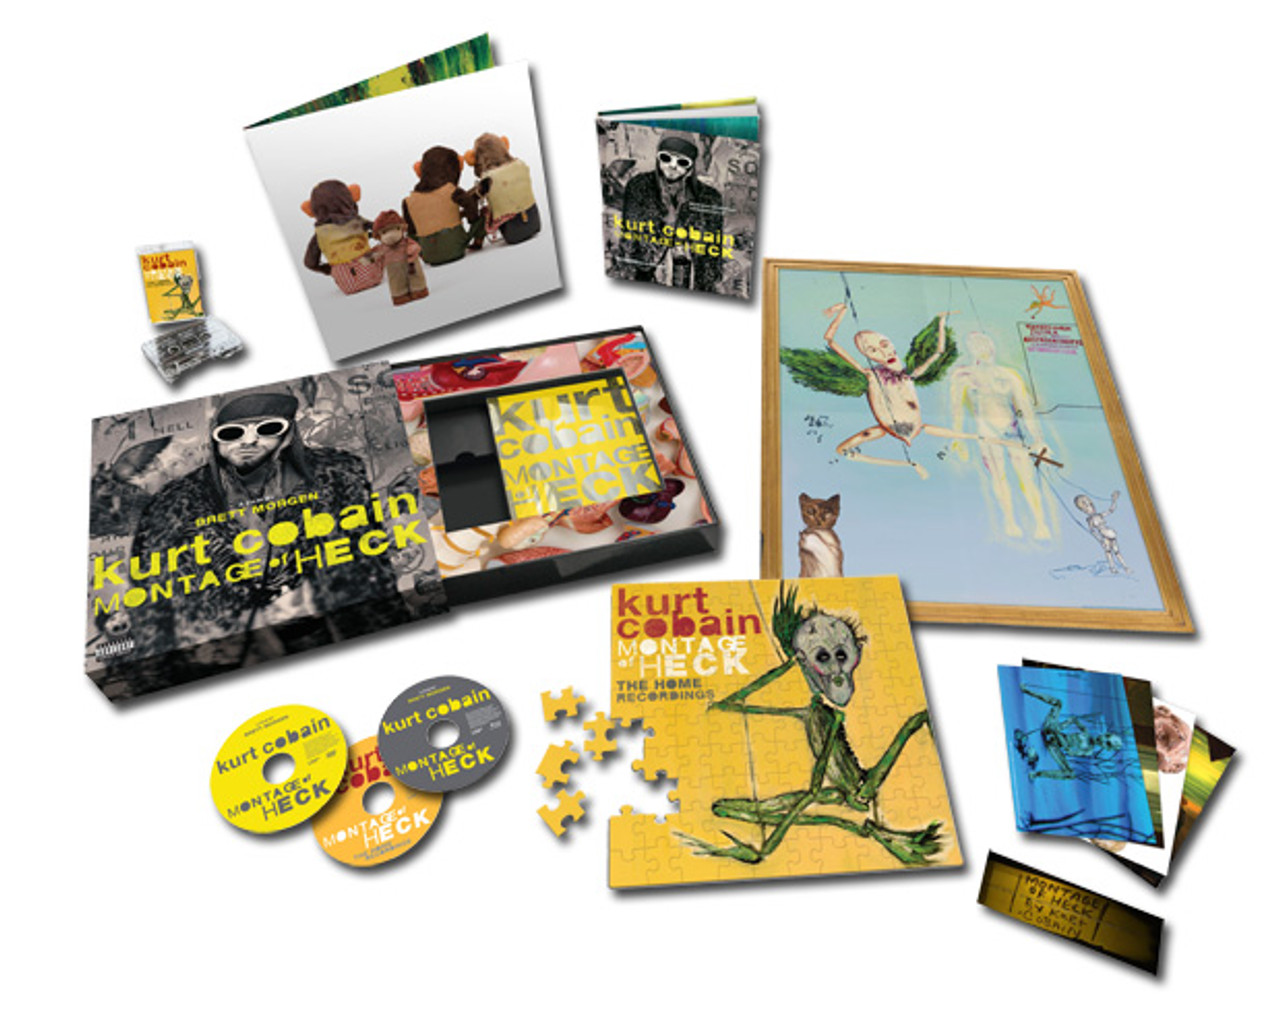 Kurt Cobain Montage of Heck Super Deluxe CD, DVD, Blu-Ray Disc